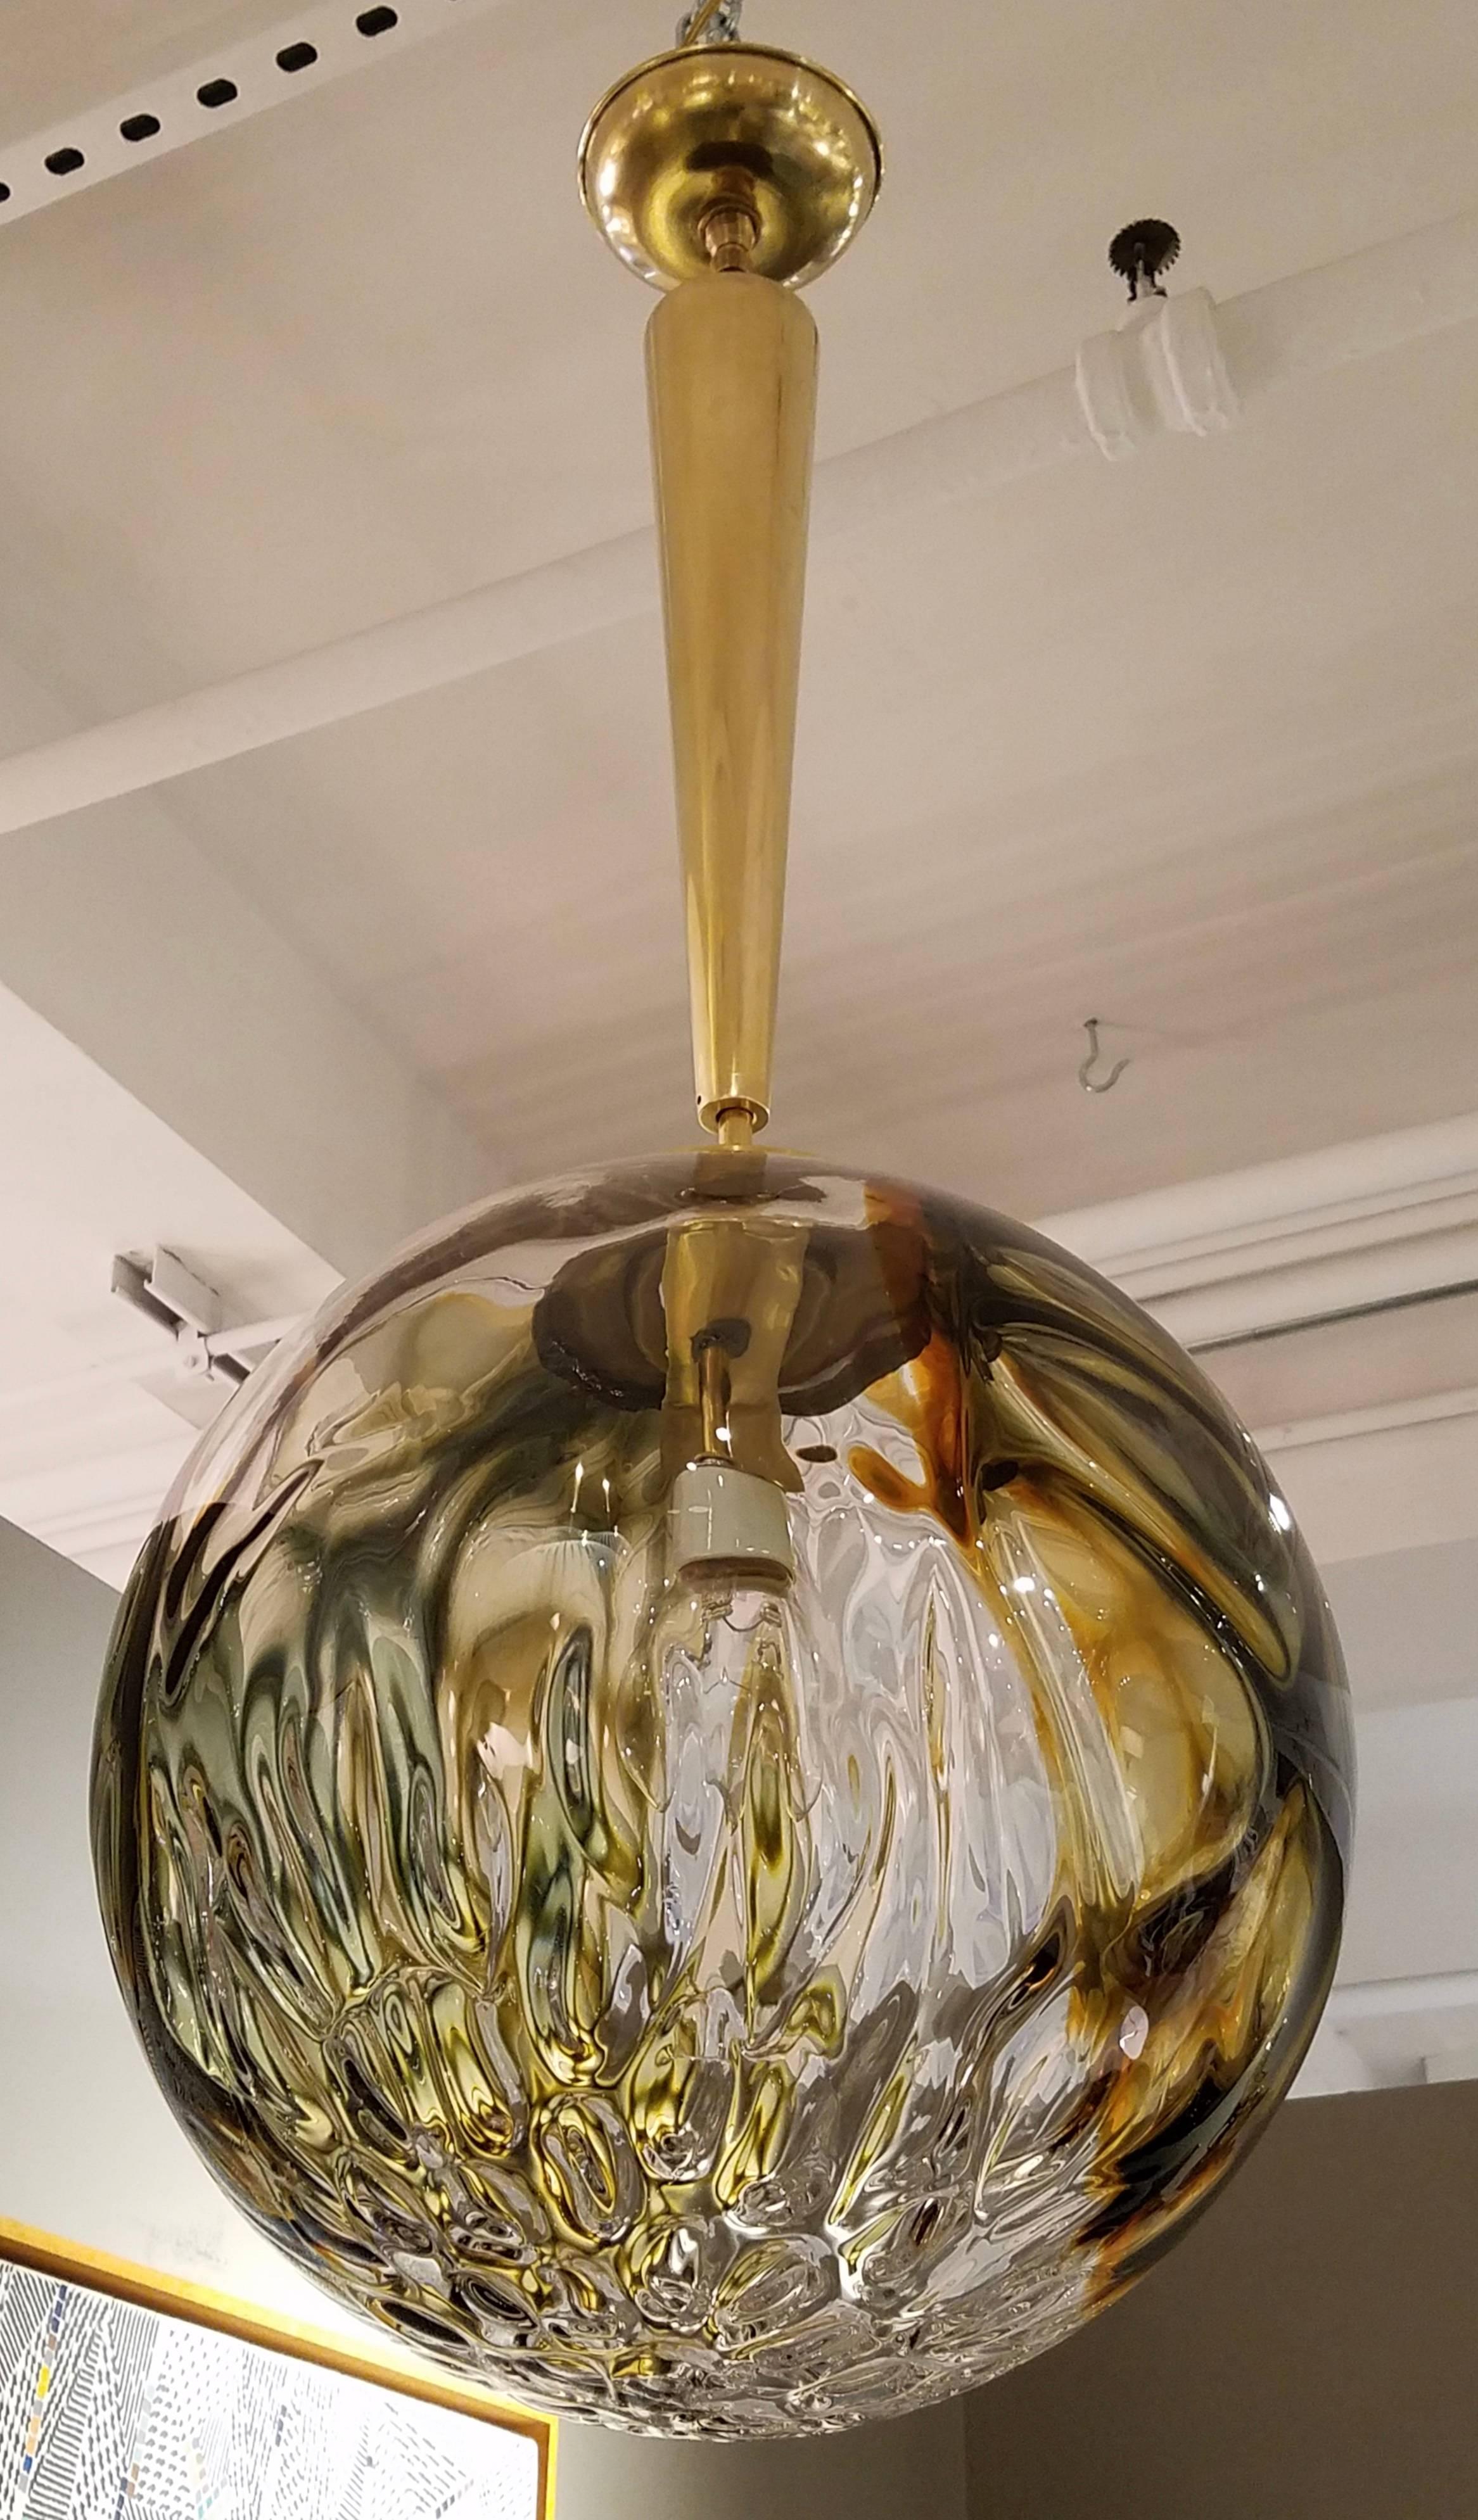 An Italian Mid-Century Murano globe with a mottled dark green, amber and clear coloration, the thick handblown glass with very unusual shallow lozenge shaped depressions creating textured, surface patterns of faceted prisms, the single socket newly